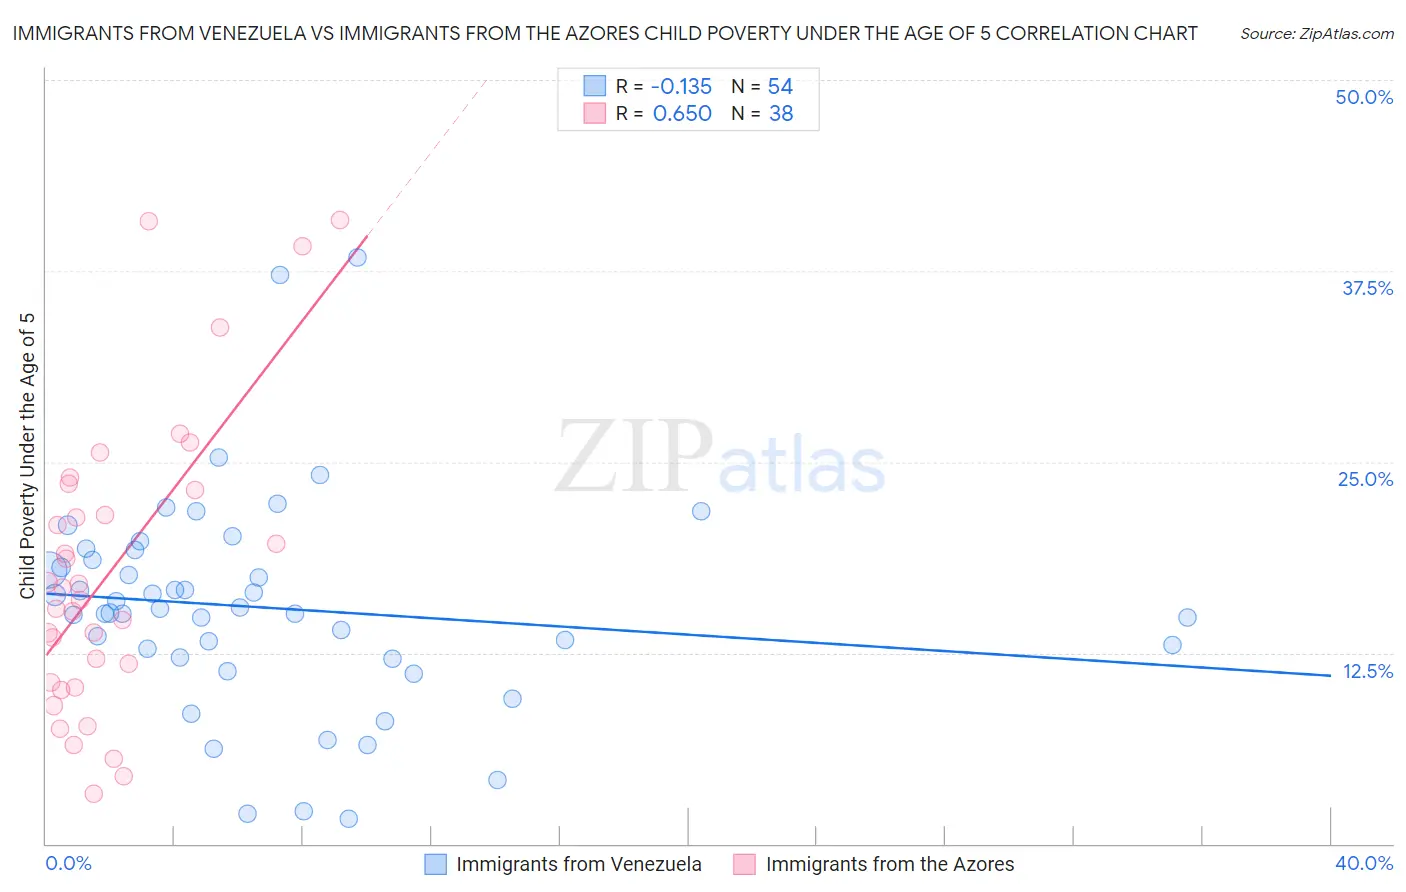 Immigrants from Venezuela vs Immigrants from the Azores Child Poverty Under the Age of 5